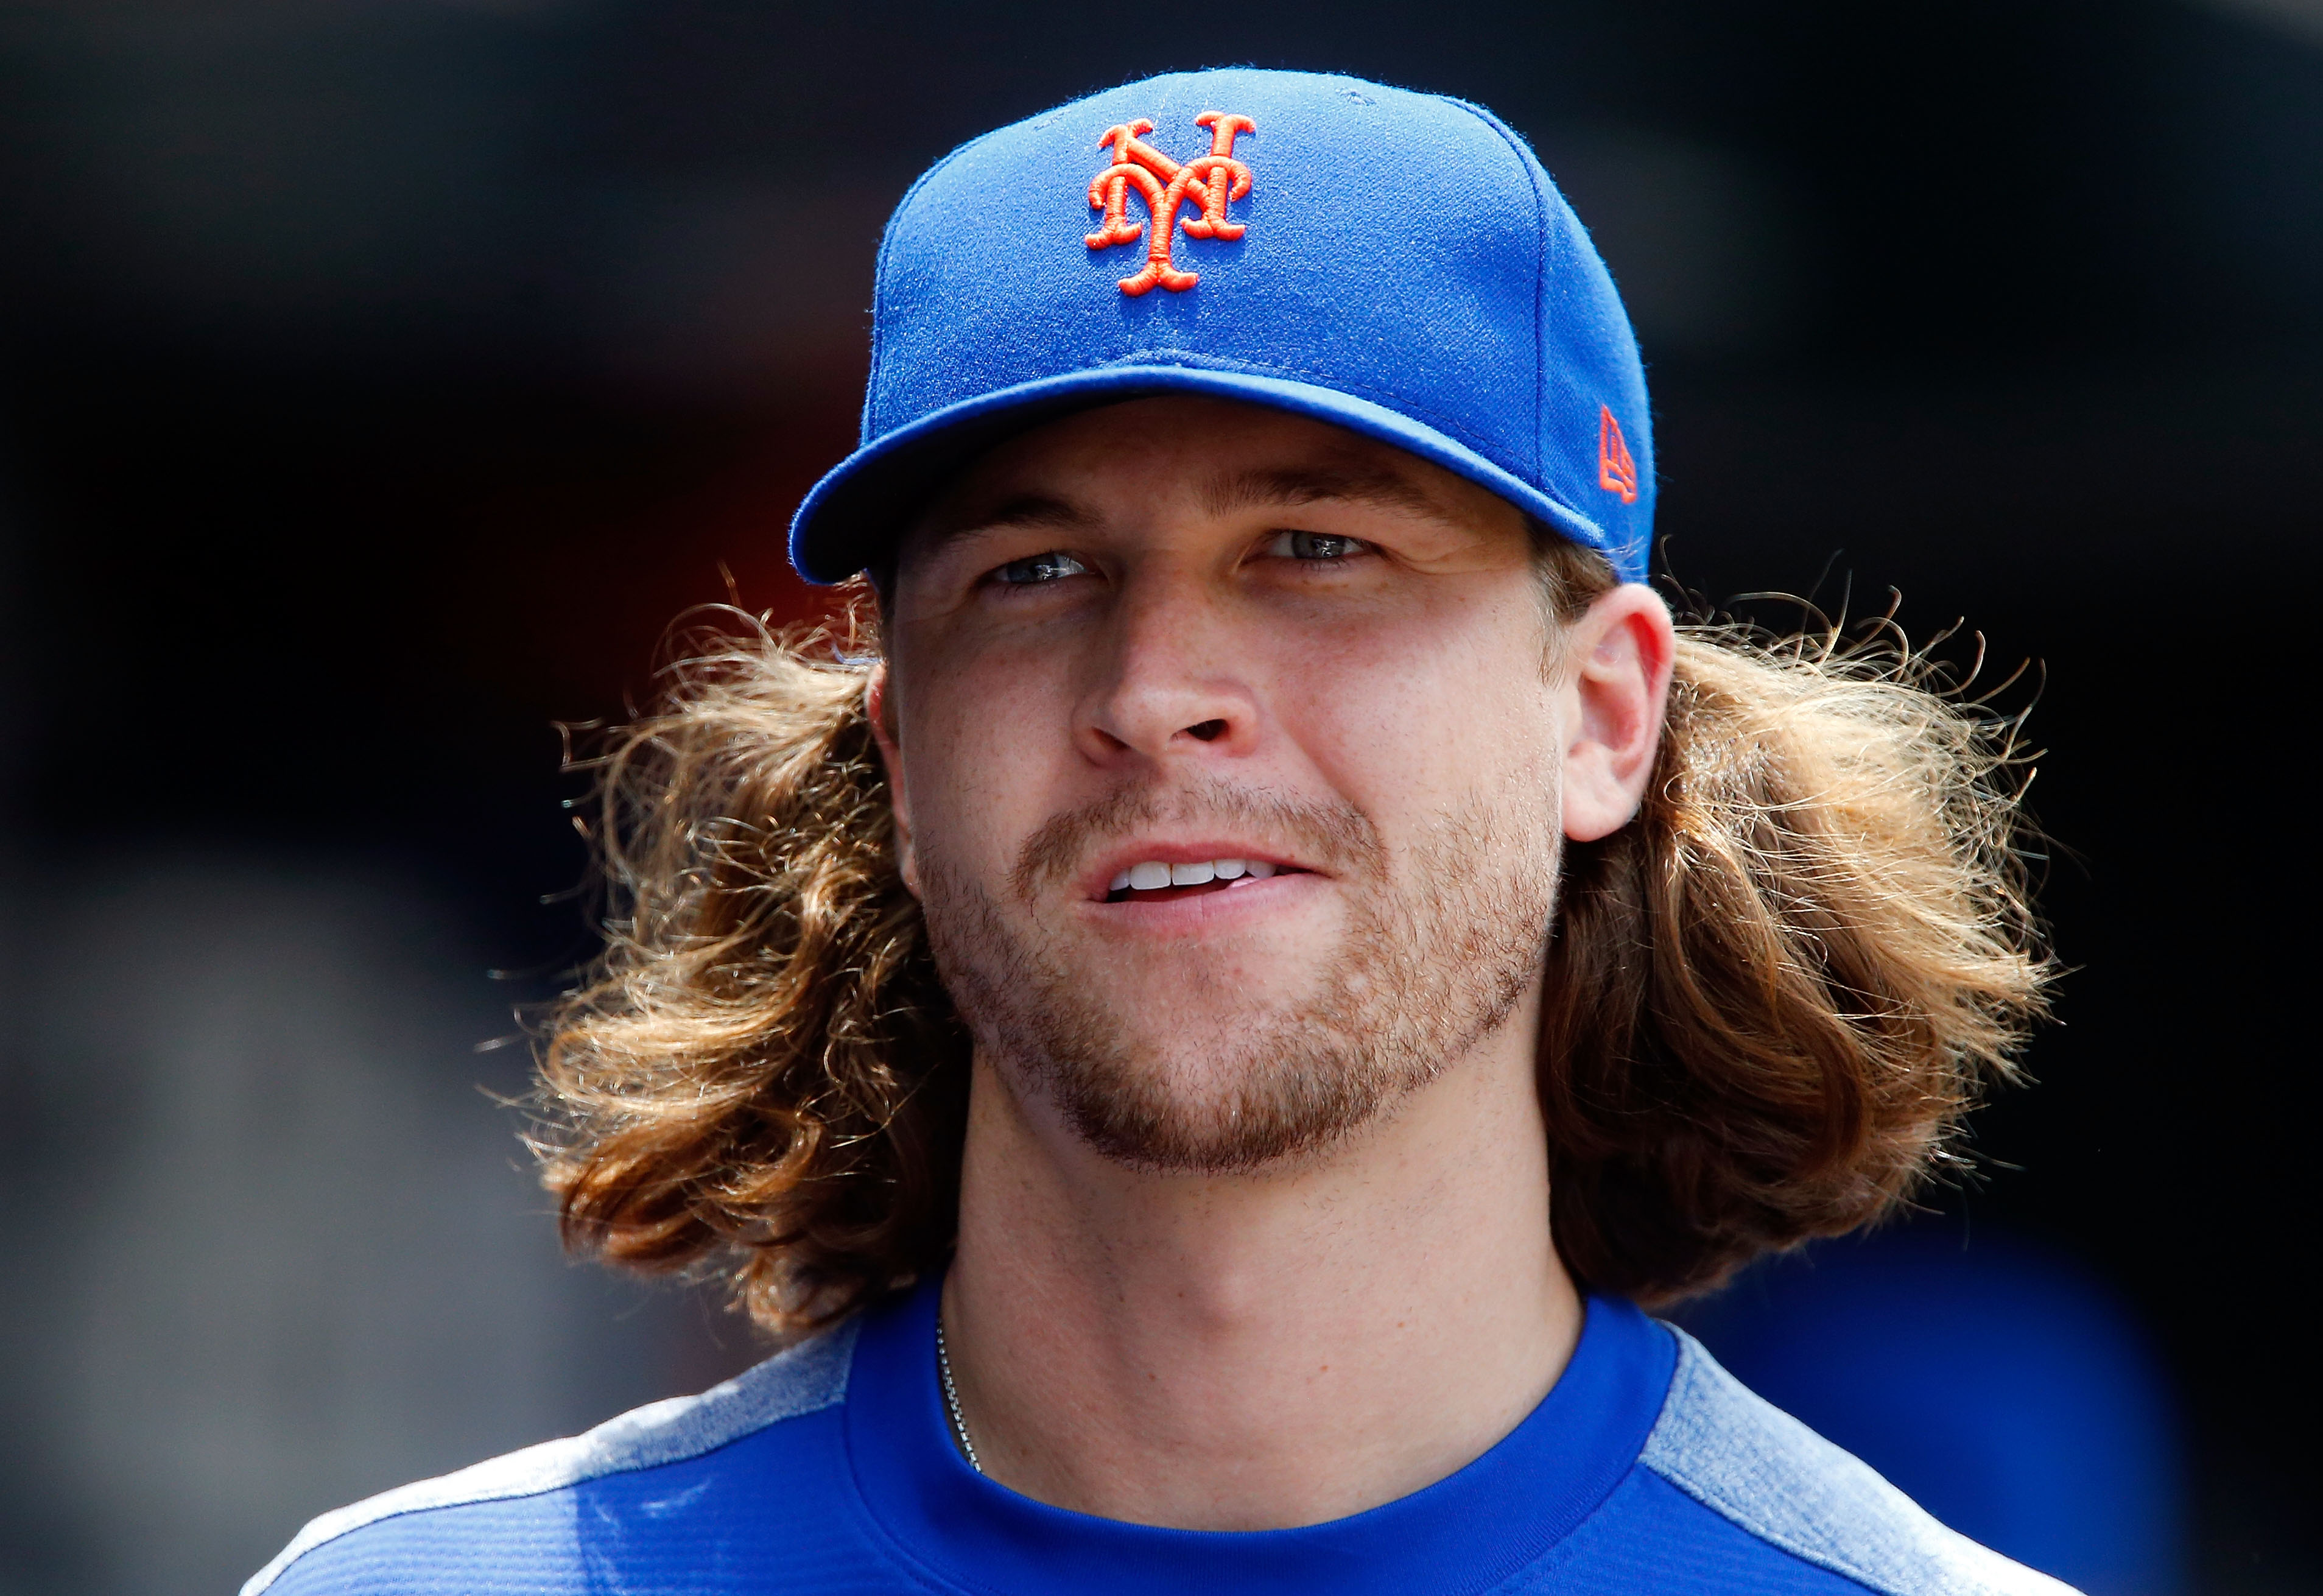 LOOK: Mets ace Jacob deGrom cut off his long flowing locks and got a haircut  